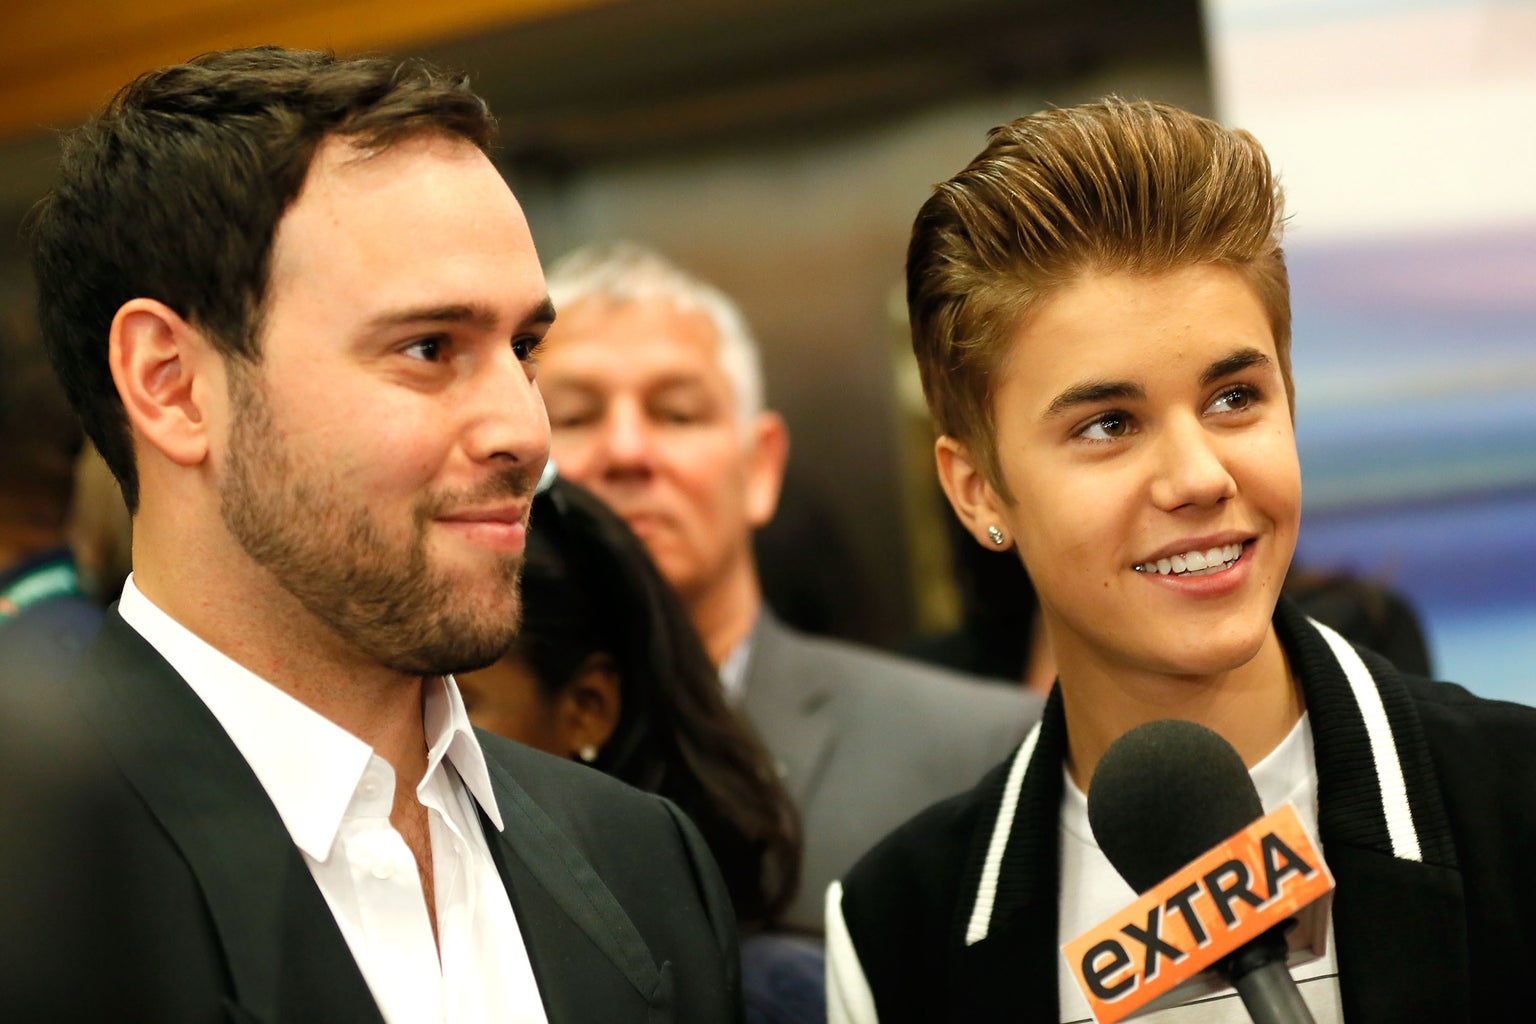 justin bieber and scooter braun at the 2012 tribeca film festival